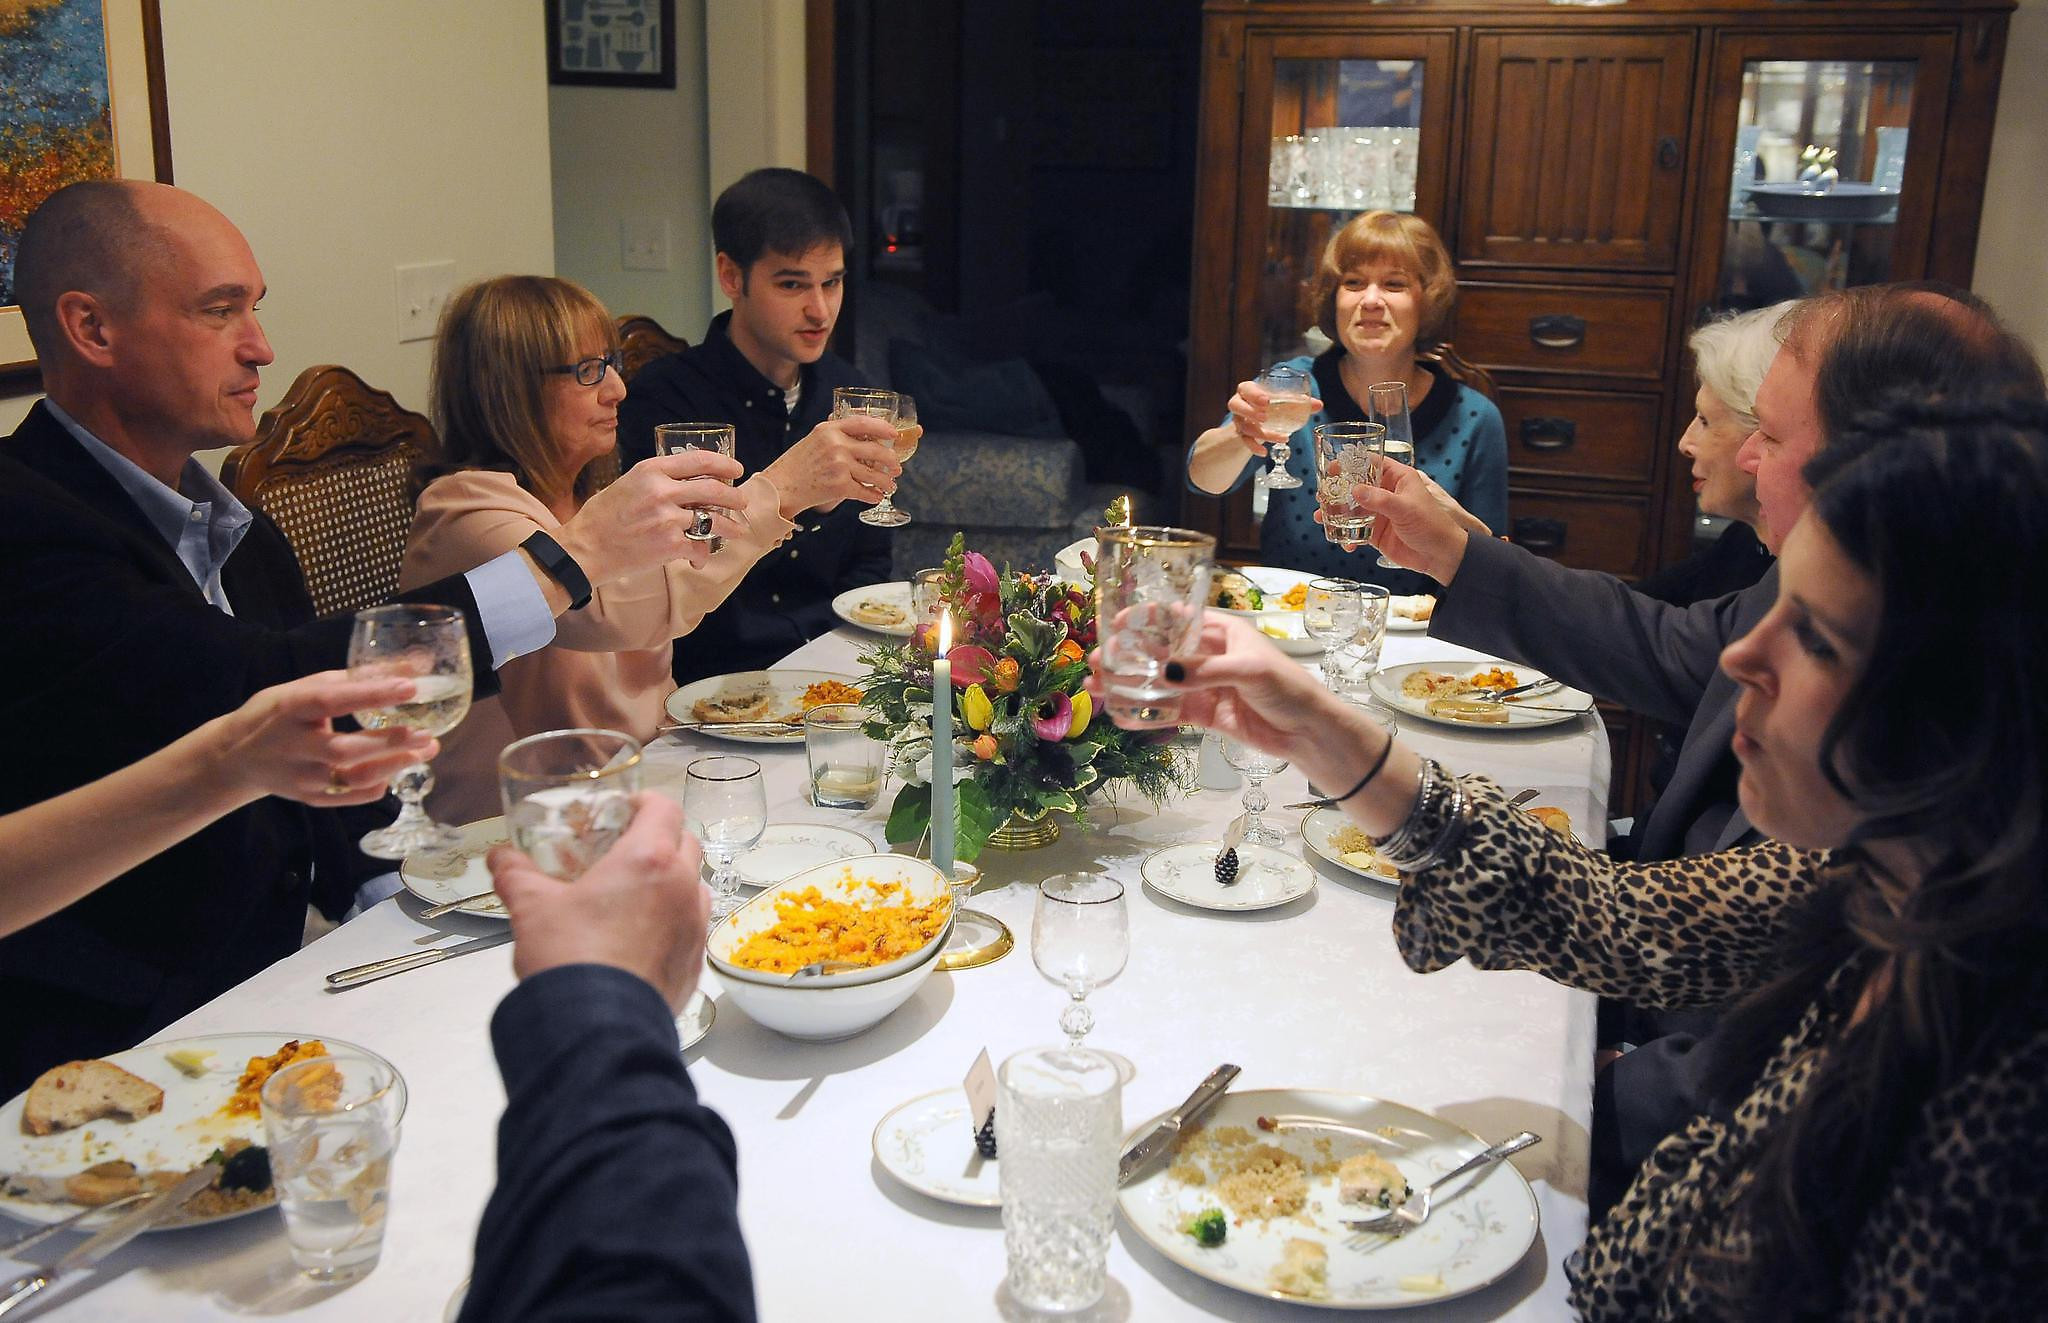 Formal Dinner Party Ideas
 Is hosting a classic dinner party worth the fuss